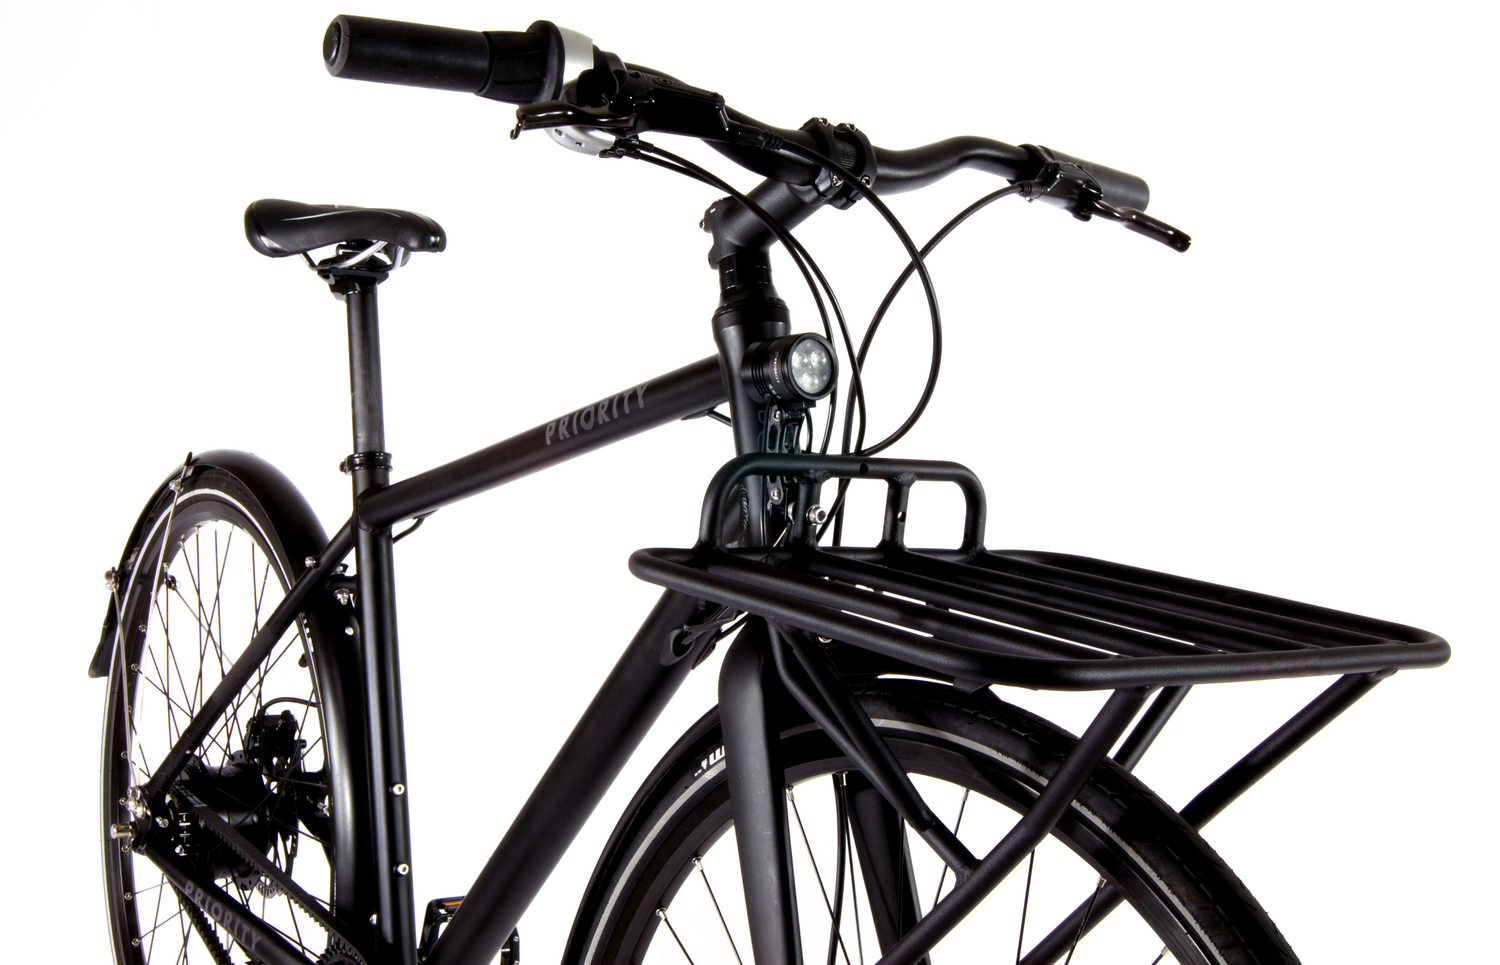 Priority Front Porteur Rack holding a large bag